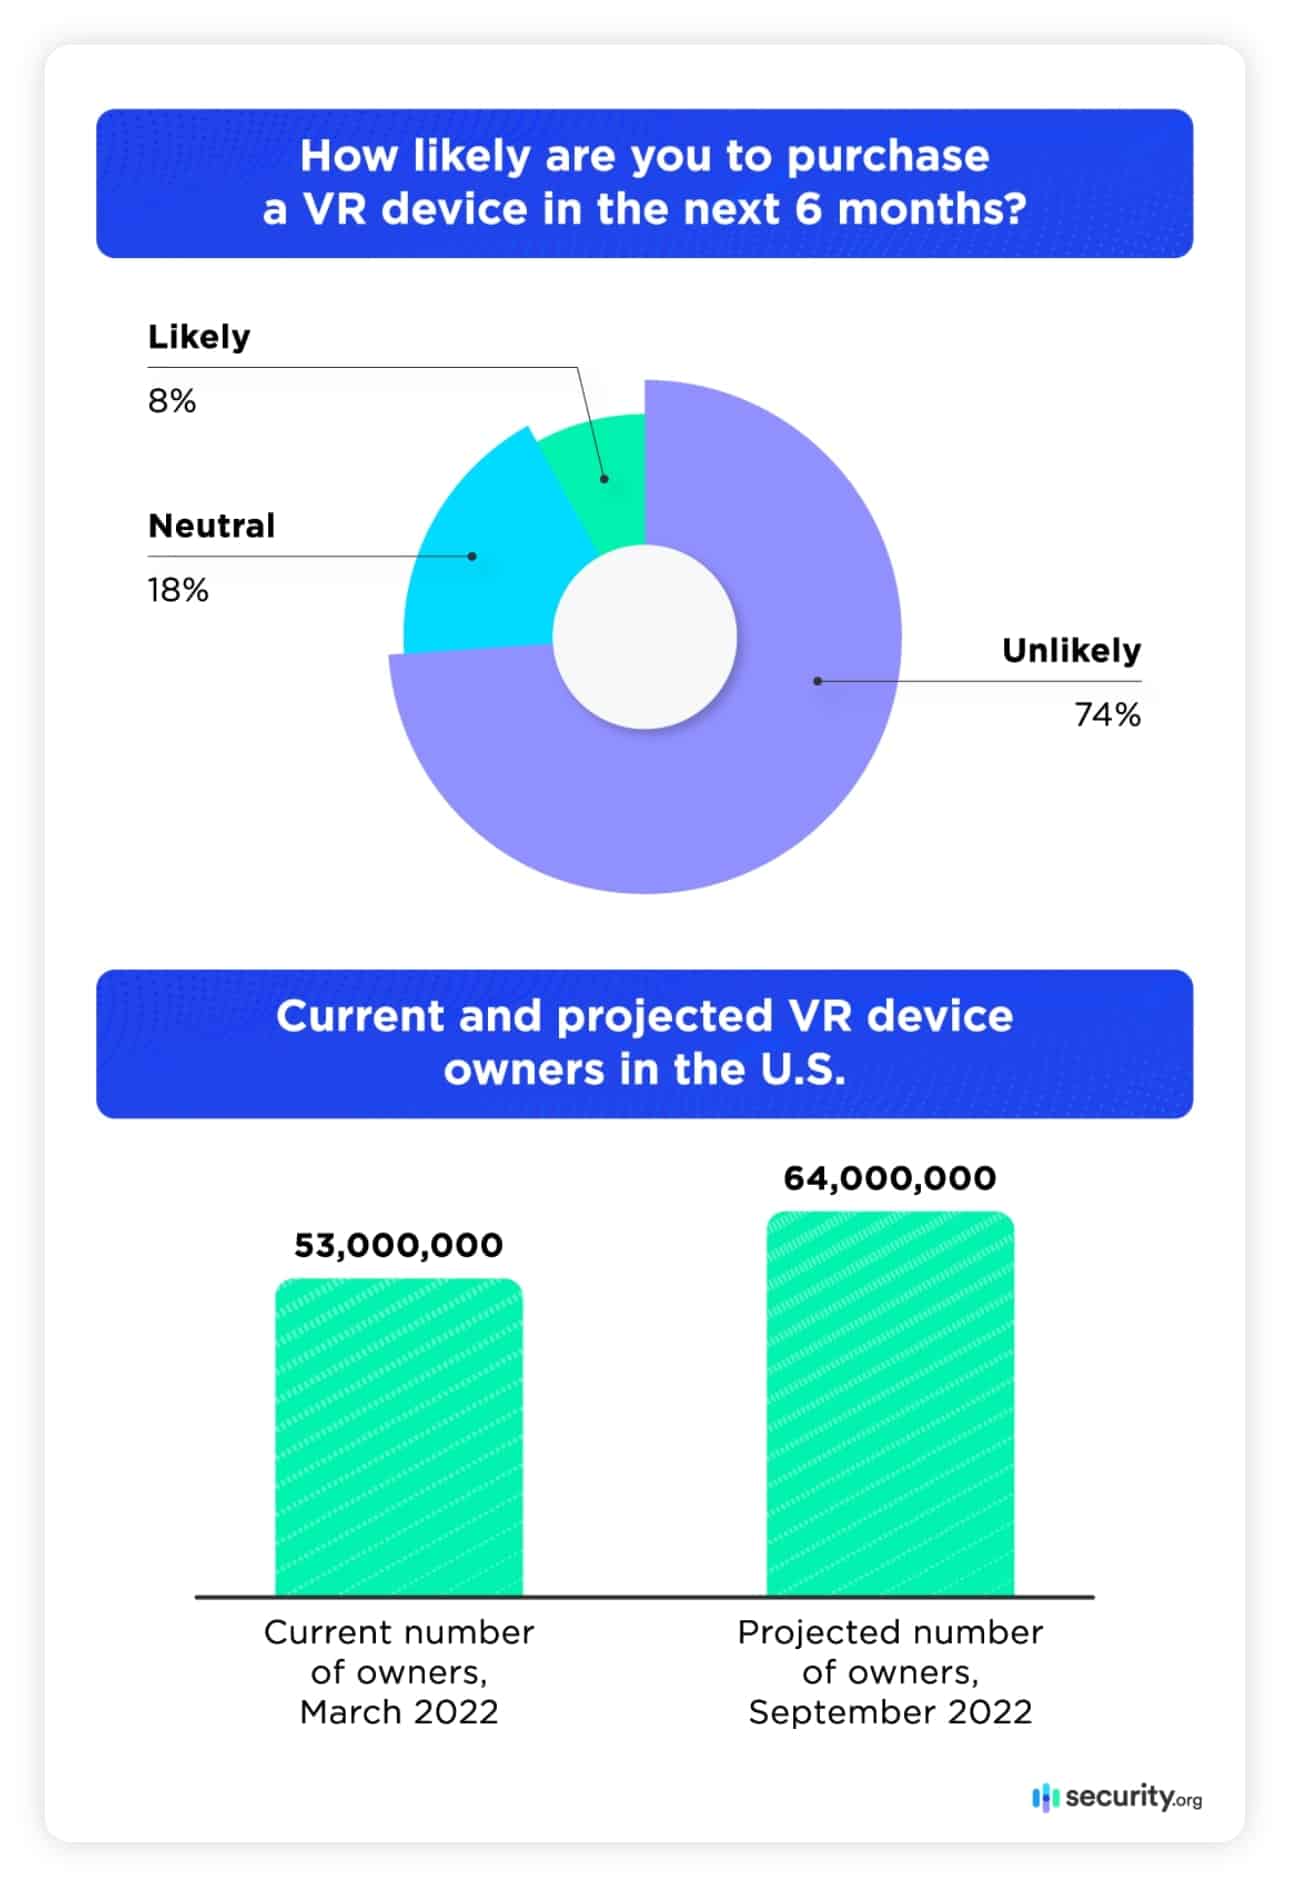 How likely are you to purchase a VR device in the next 6 months?